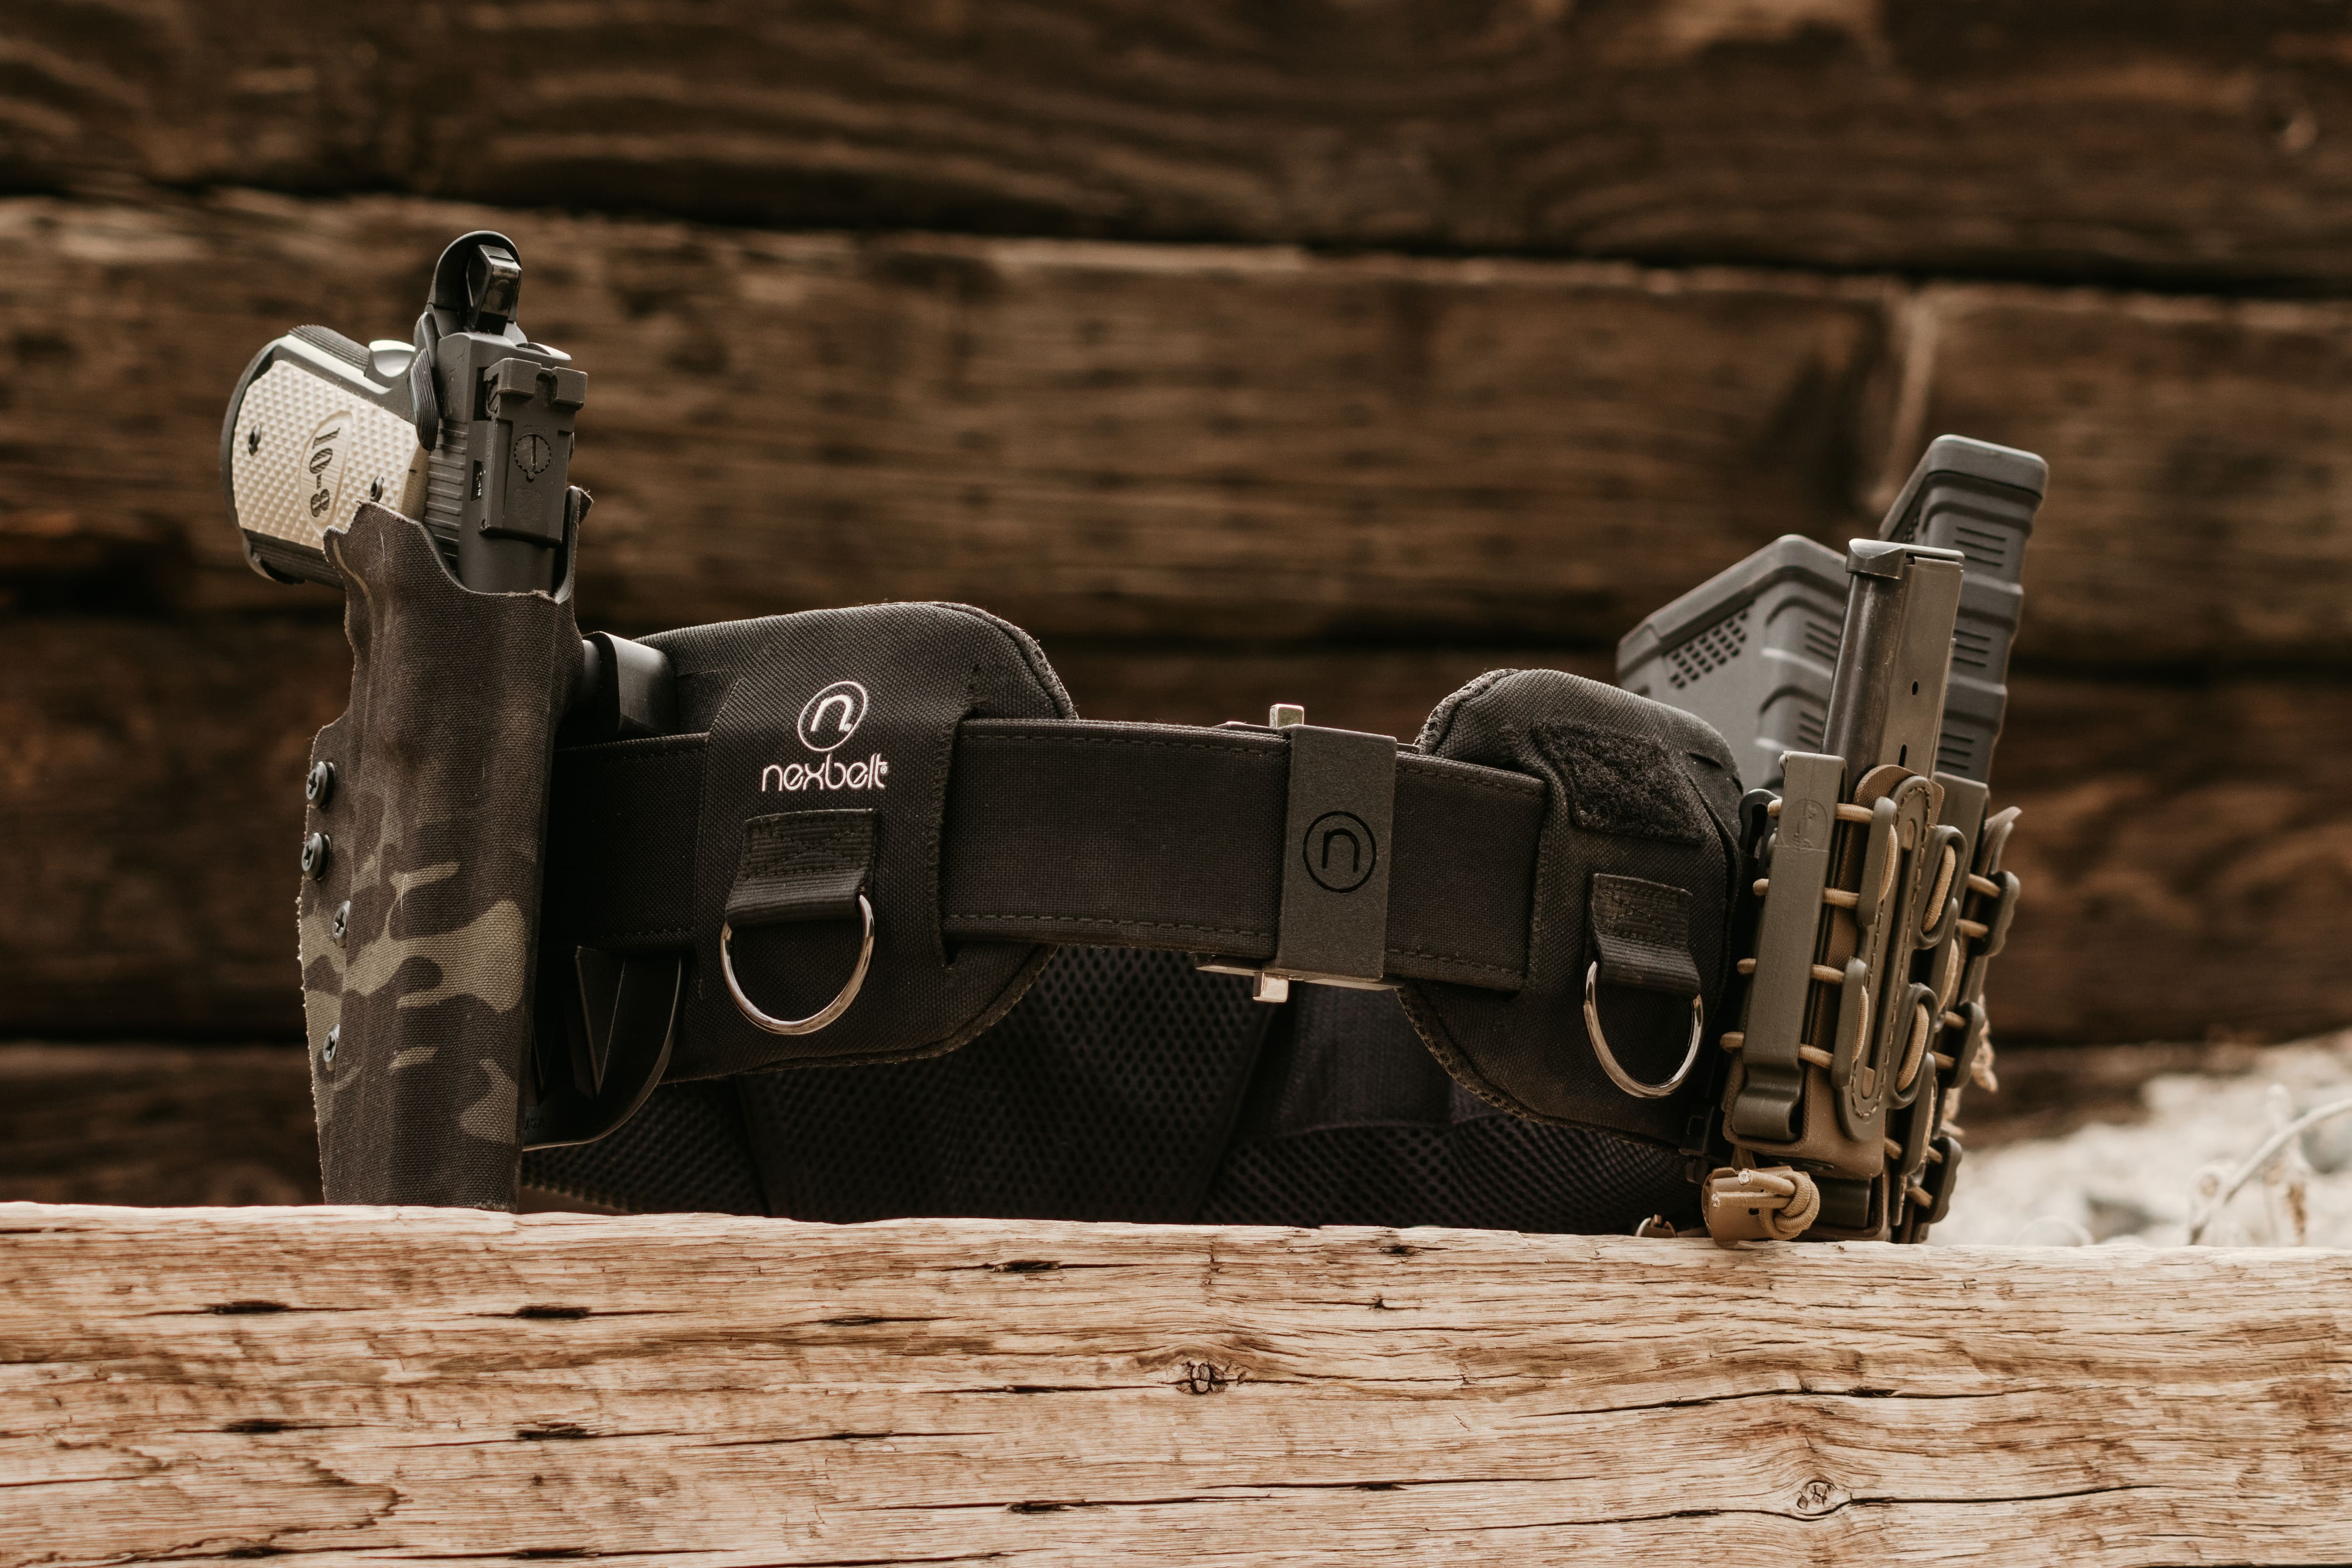 A black tactical rig battle belt sits against a wood background, the belt has several artillery pieces clipped to it, as well as the Nexbelt logo - battle belt vs chest rig | tactical rig belt